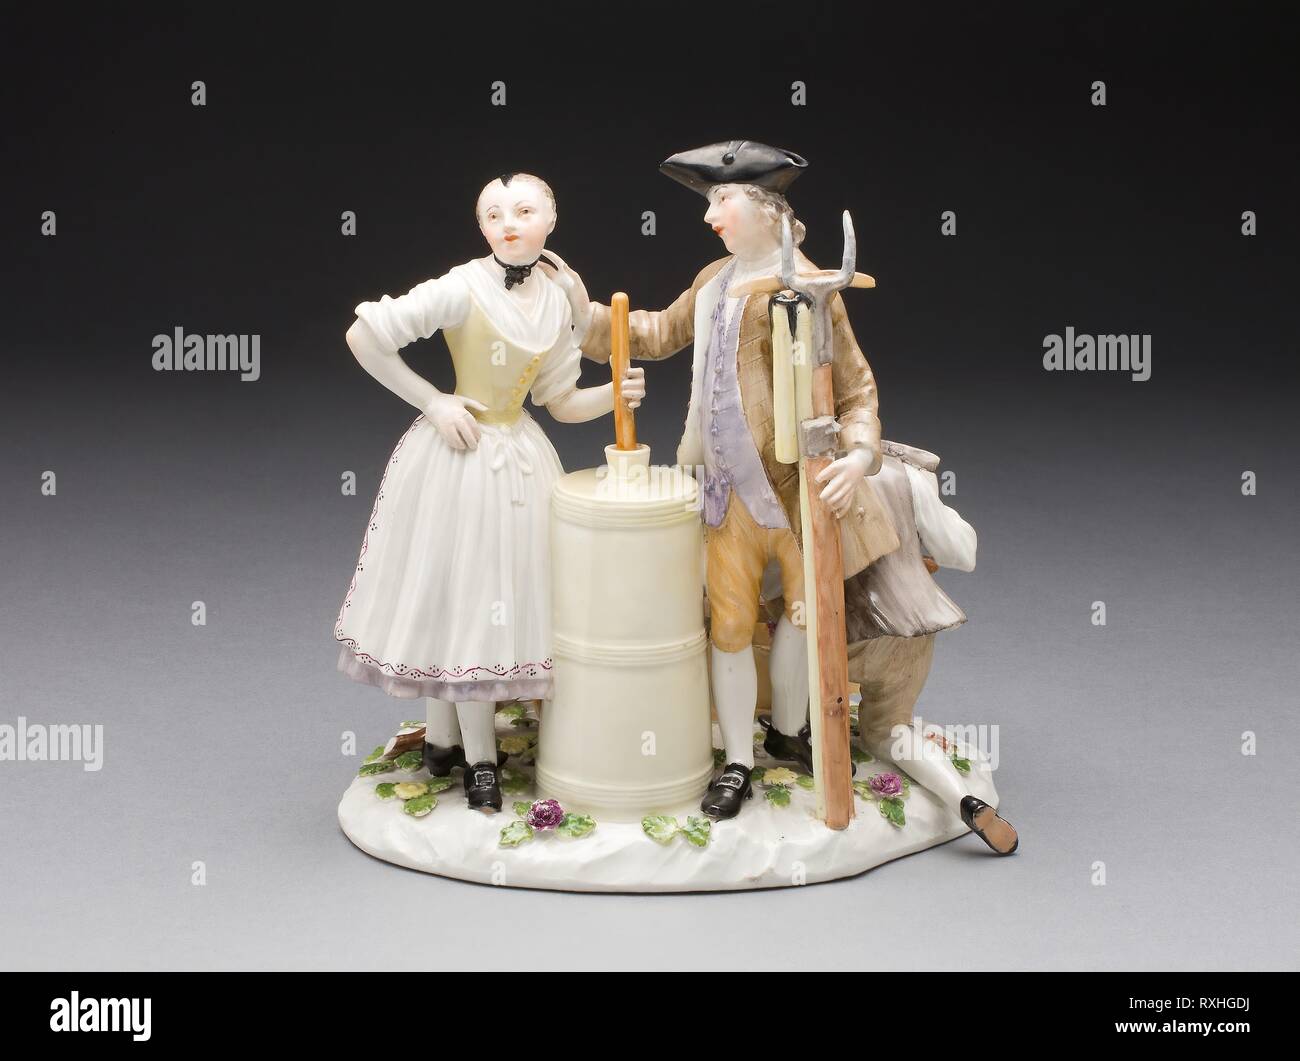 Farm Group of Three Figures. Meissen Porcelain Manufactory; German, founded 1710. Date: 1760-1770. Dimensions: H. 18.4 cm (7 1/4 in.). Hard-paste porcelain and polychrome enamels. Origin: Meissen. Museum: The Chicago Art Institute. Stock Photo